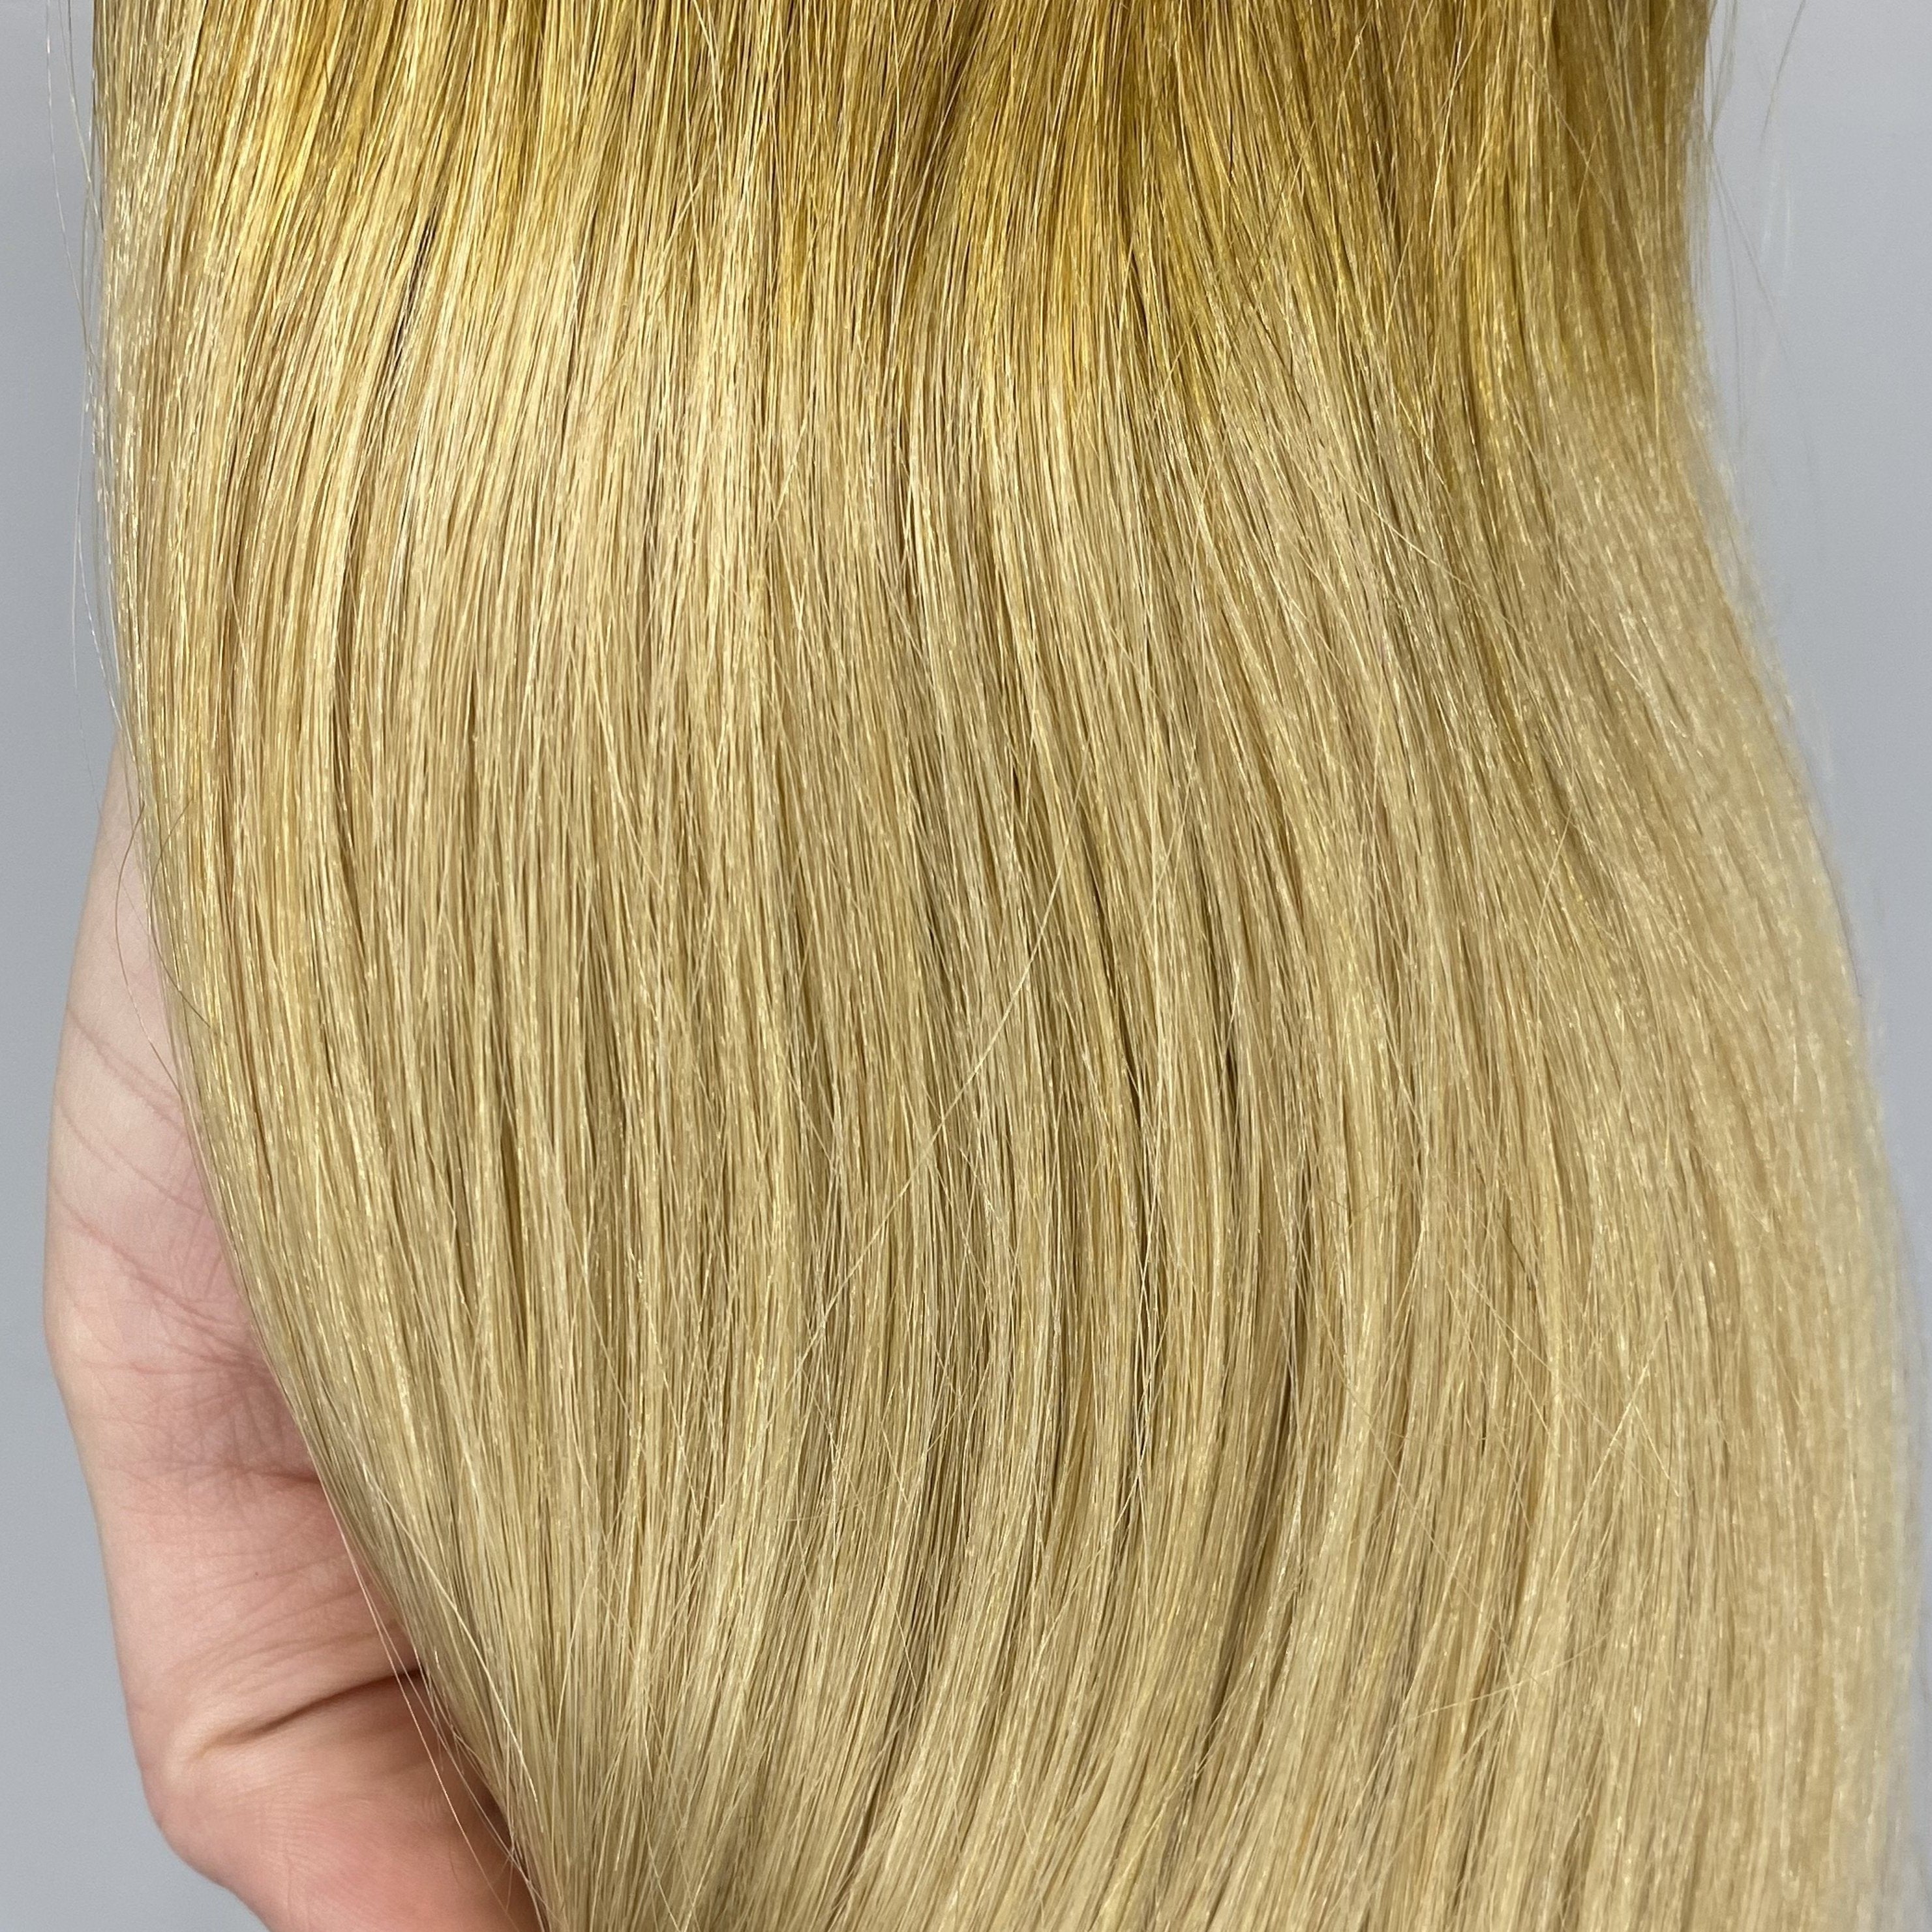 Velo Sale #6&16 - 20 inches - Copper Golden Blonde into Light Golden Blonde Ombre - Image 1